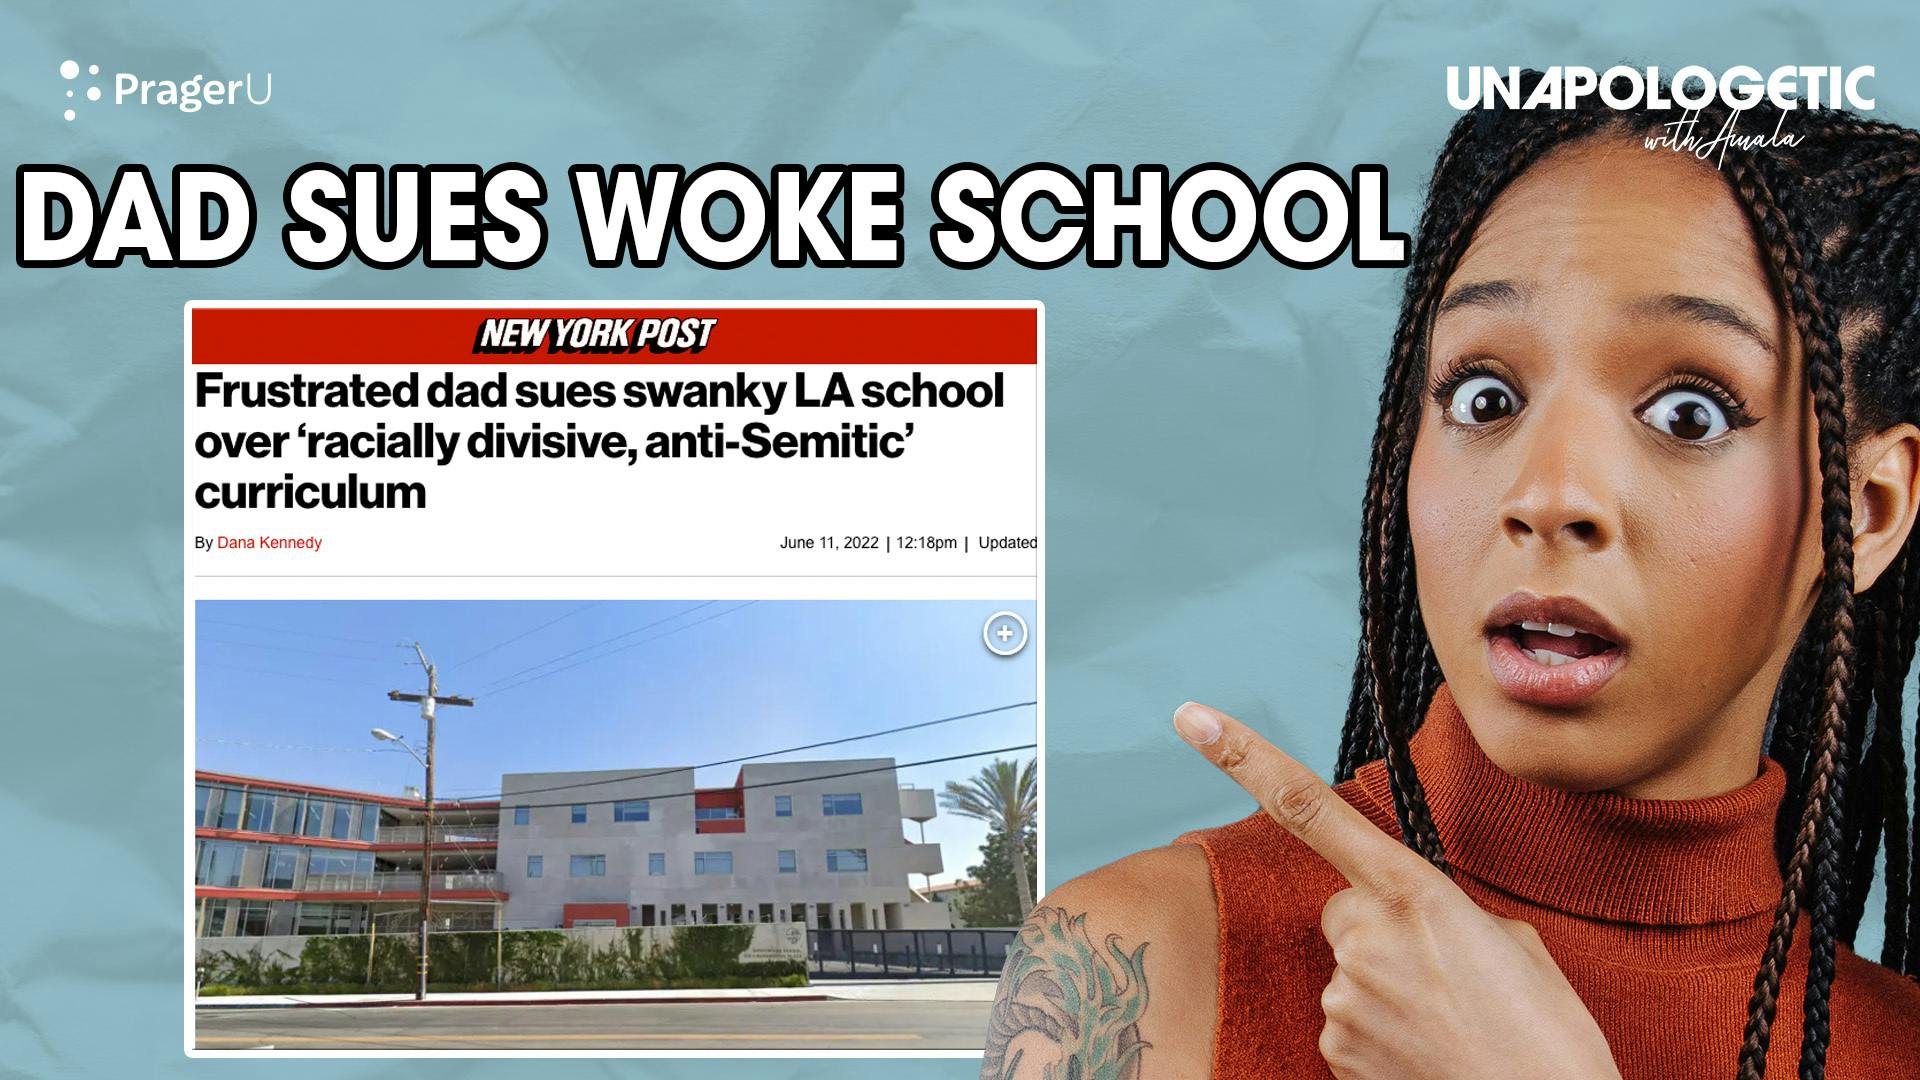 Dad Sues Daughter’s School over Woke Curriculum with Jerome Eisenberg: 8/15/2022